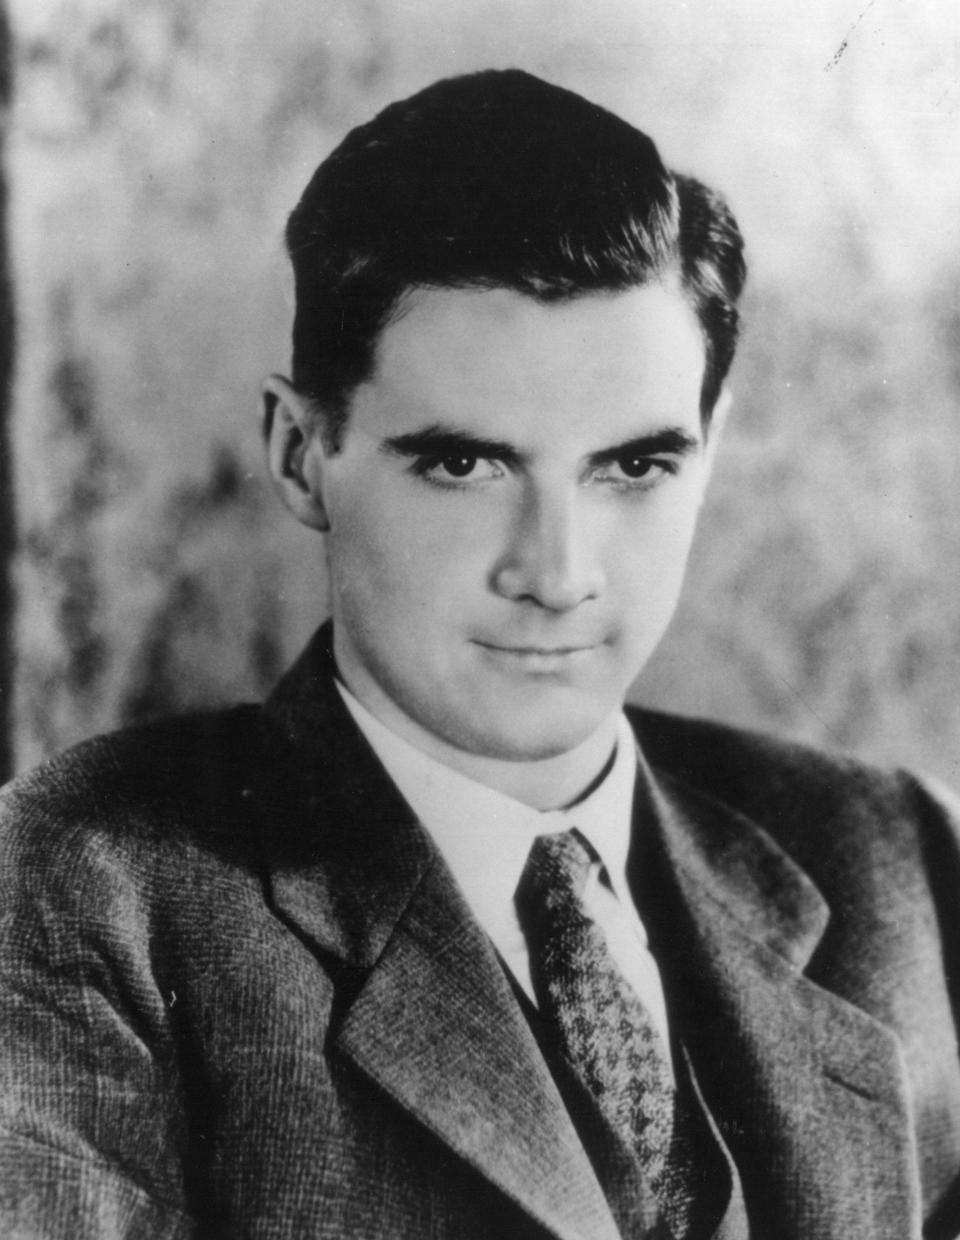 A portrait of Howard Hughes in 1938.